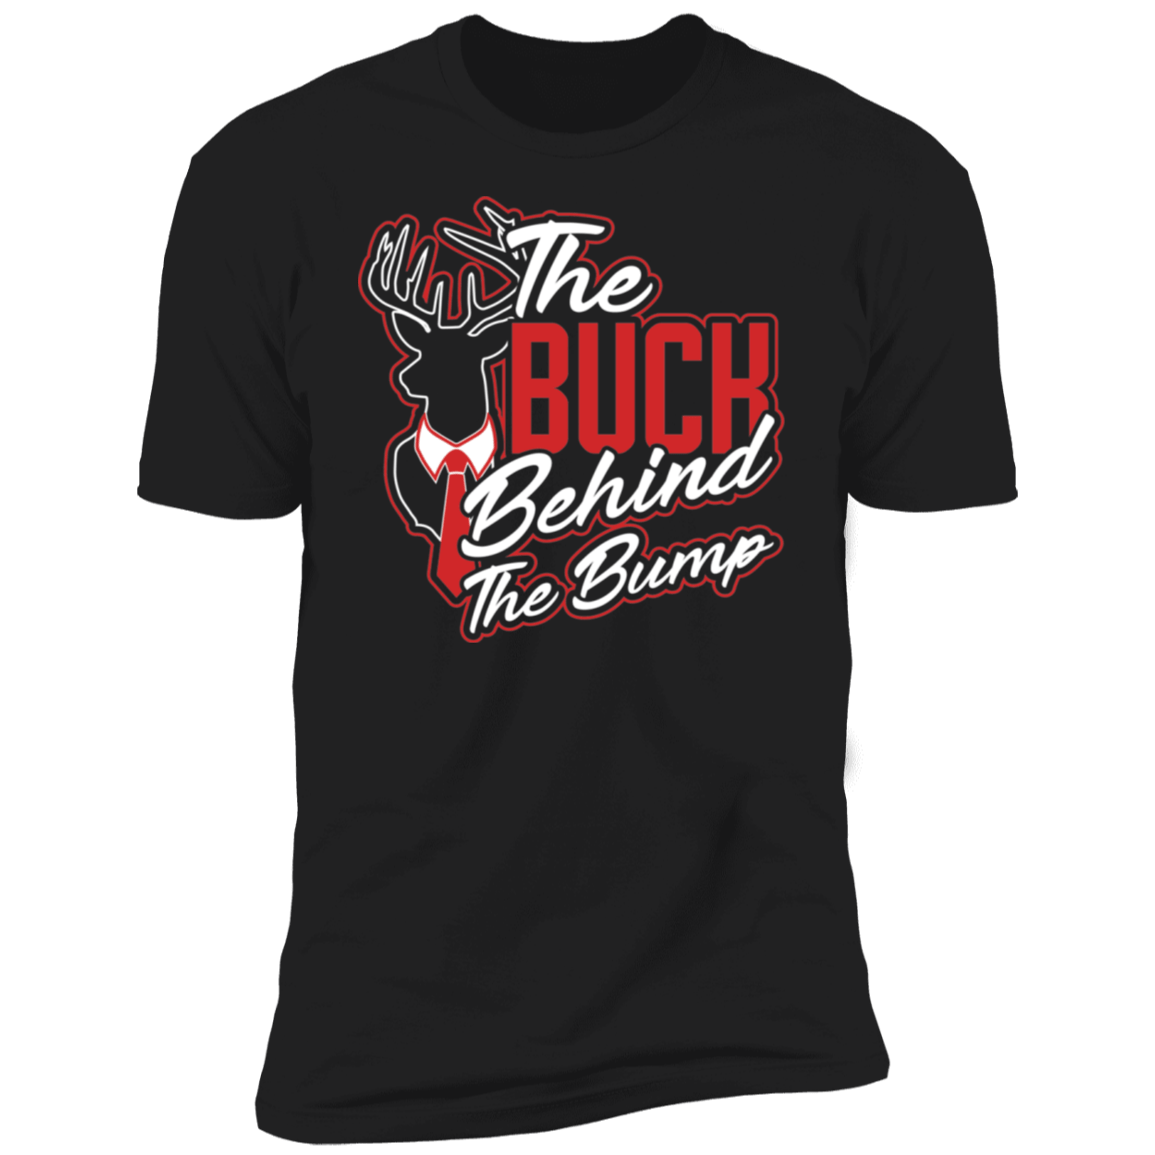 The Buck Behind The Bump (6096405659820)